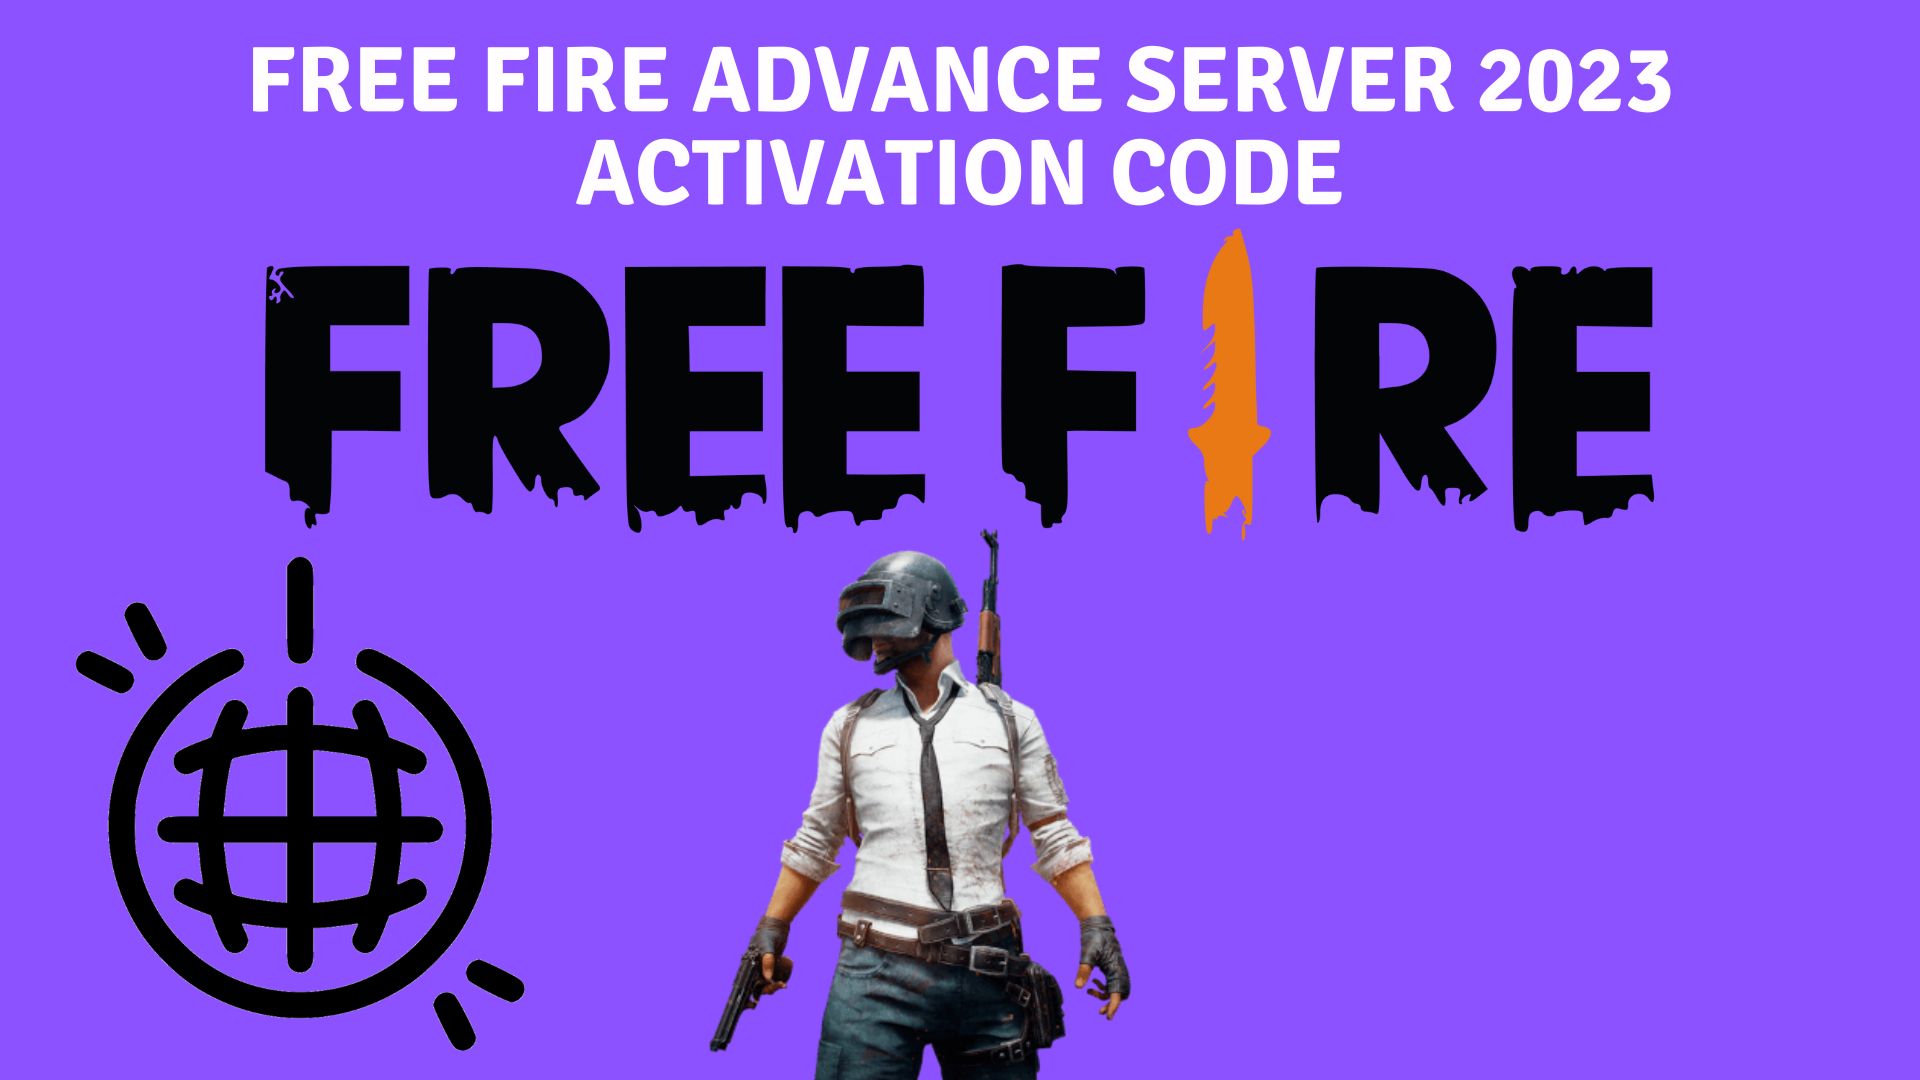 Free fire advance server 2023 activation code